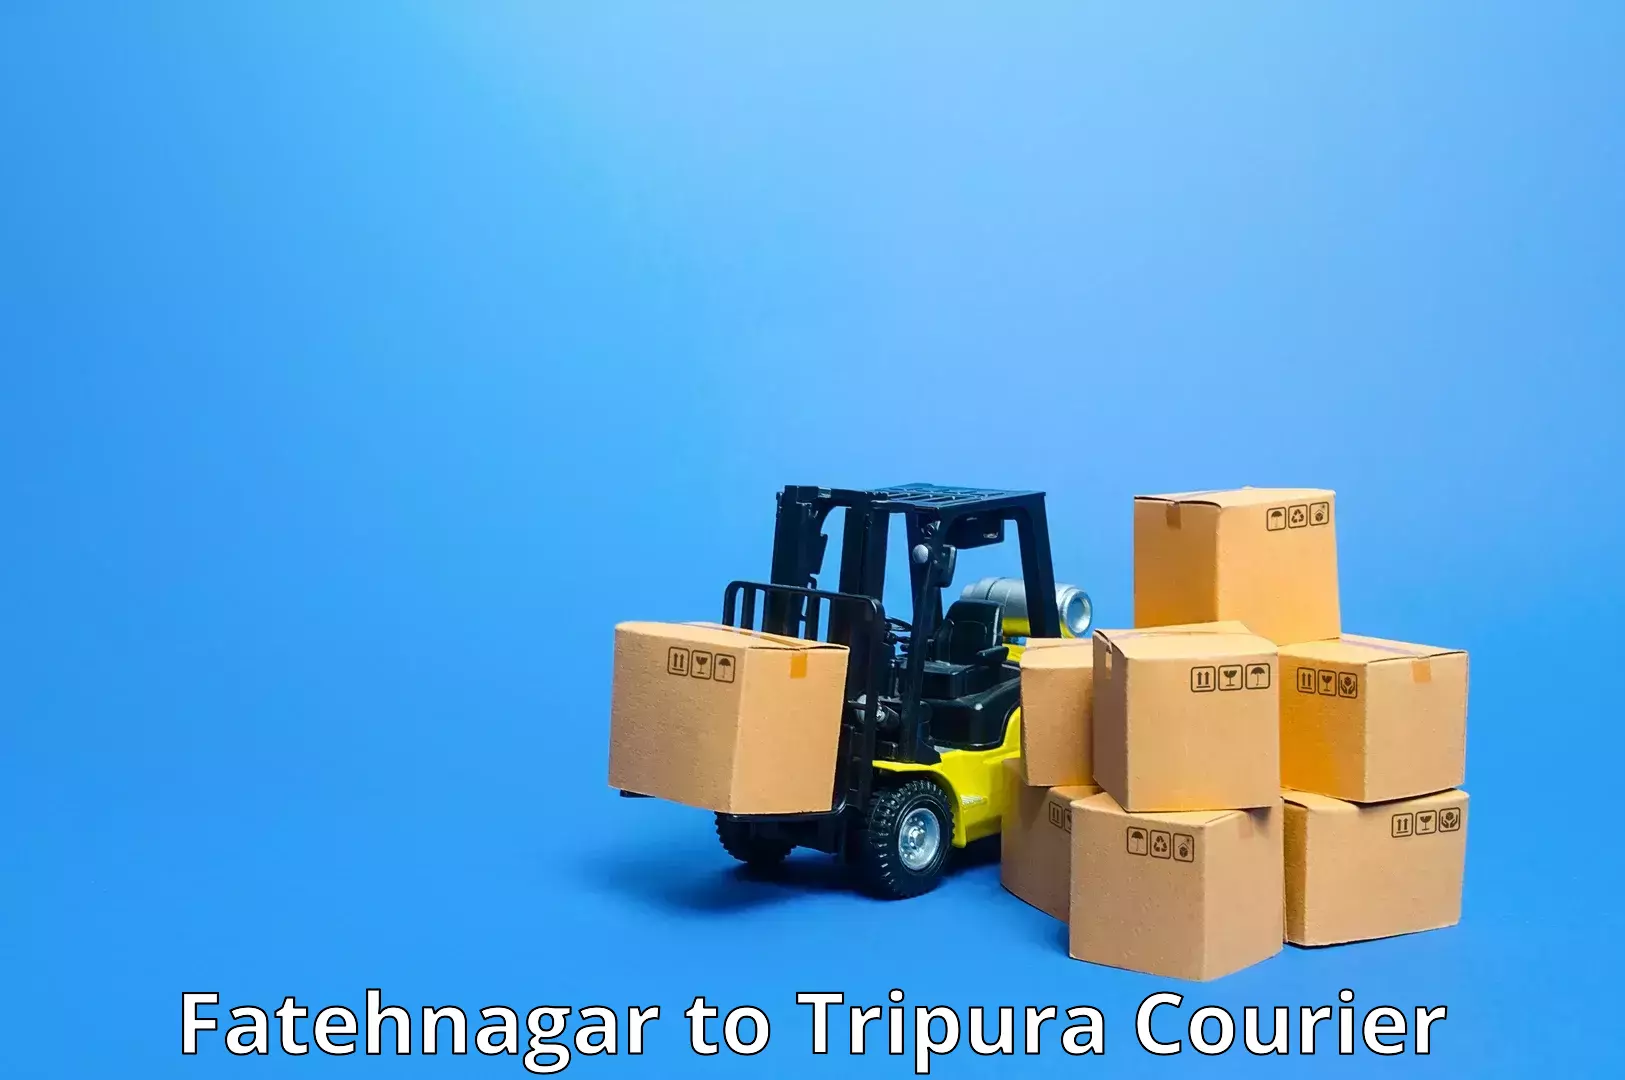 High-speed delivery in Fatehnagar to Udaipur Tripura